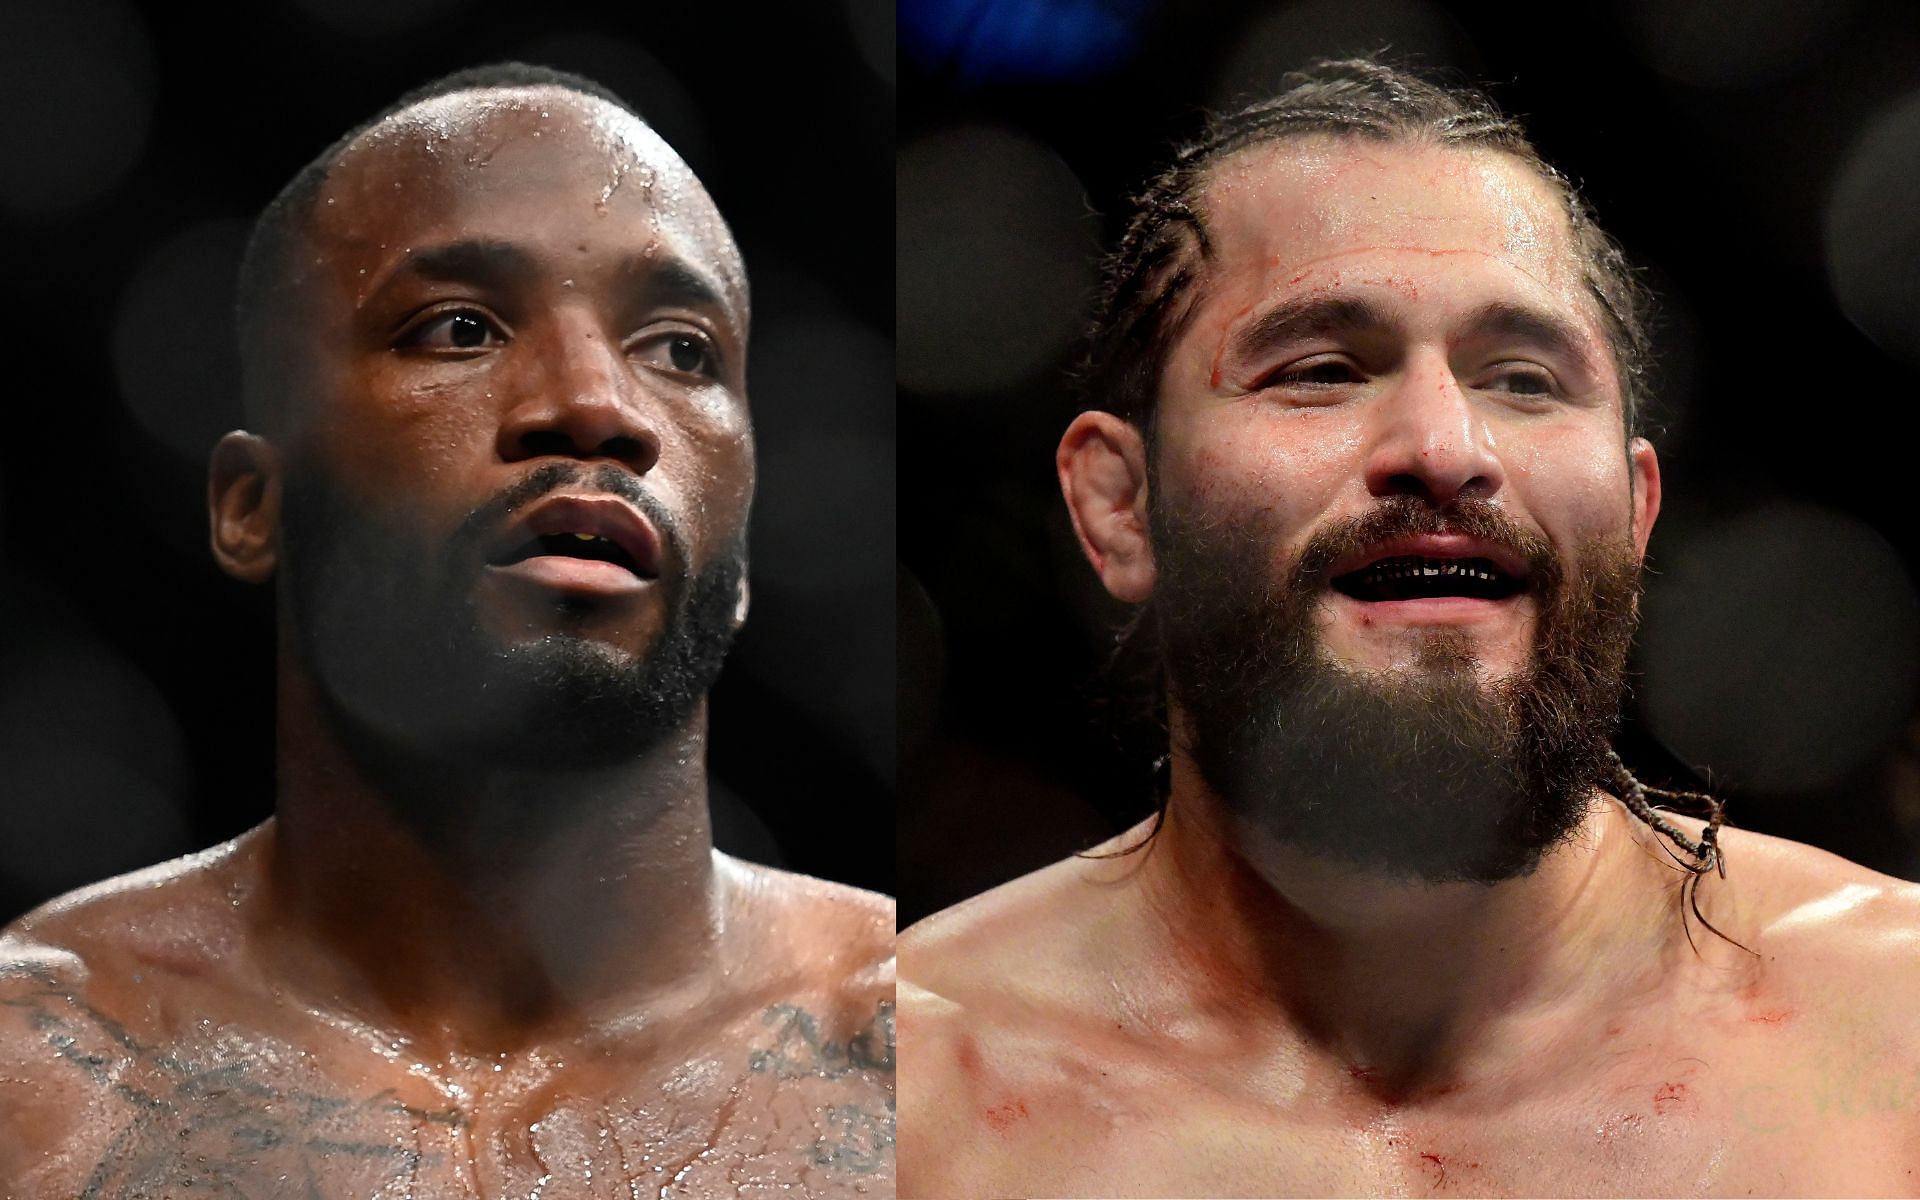 Leon Edwards (left) and Jorge Masvidal (right). [via Getty Images]